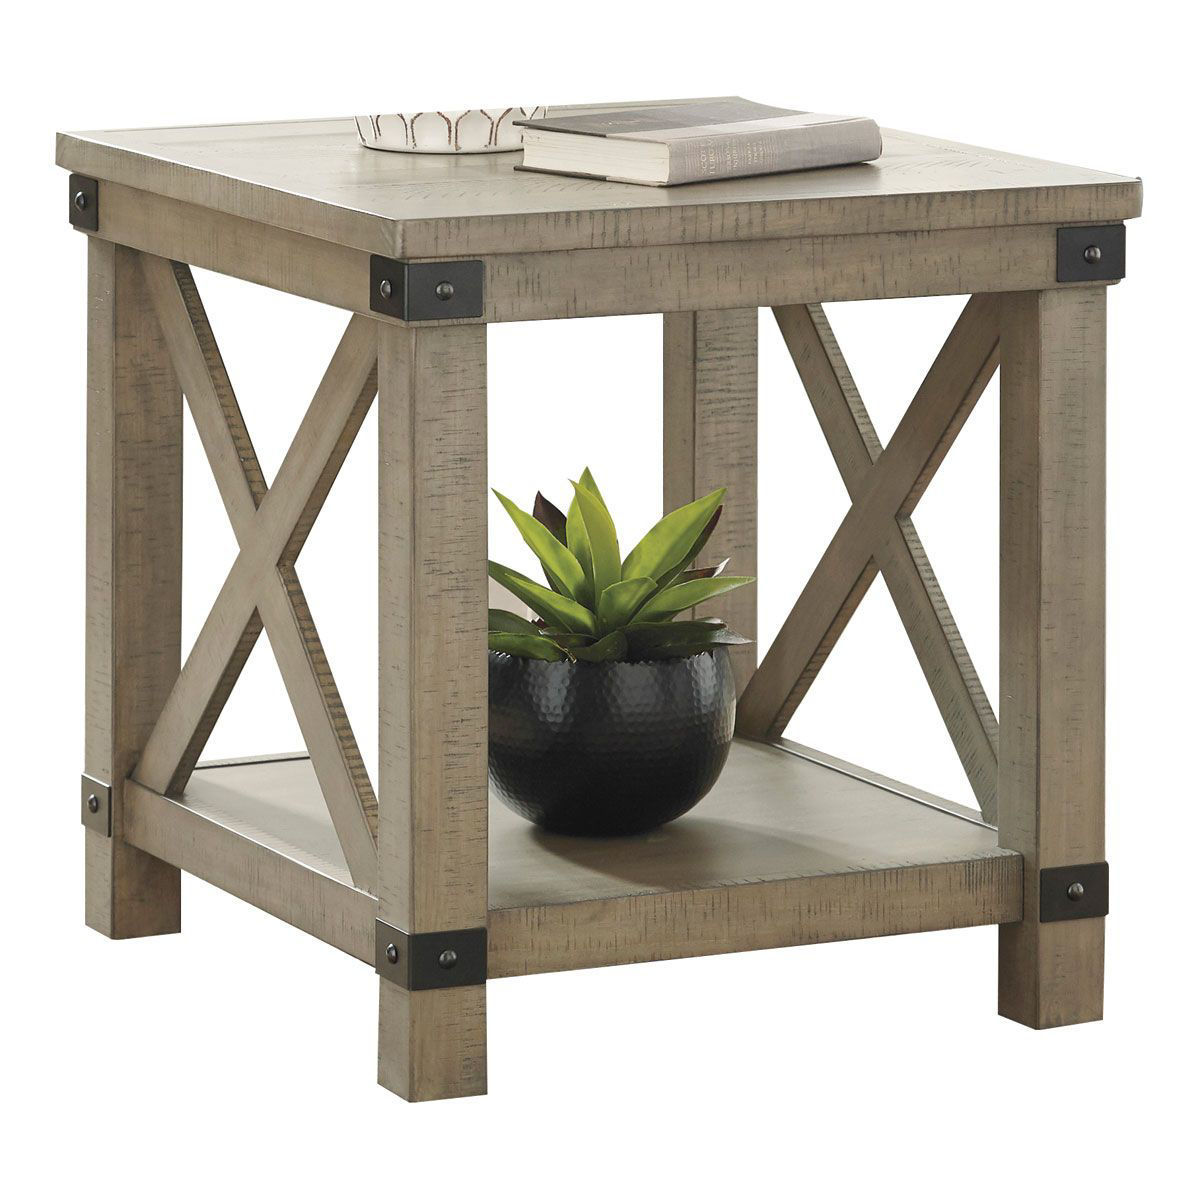 Picture of WHITLEY END TABLE